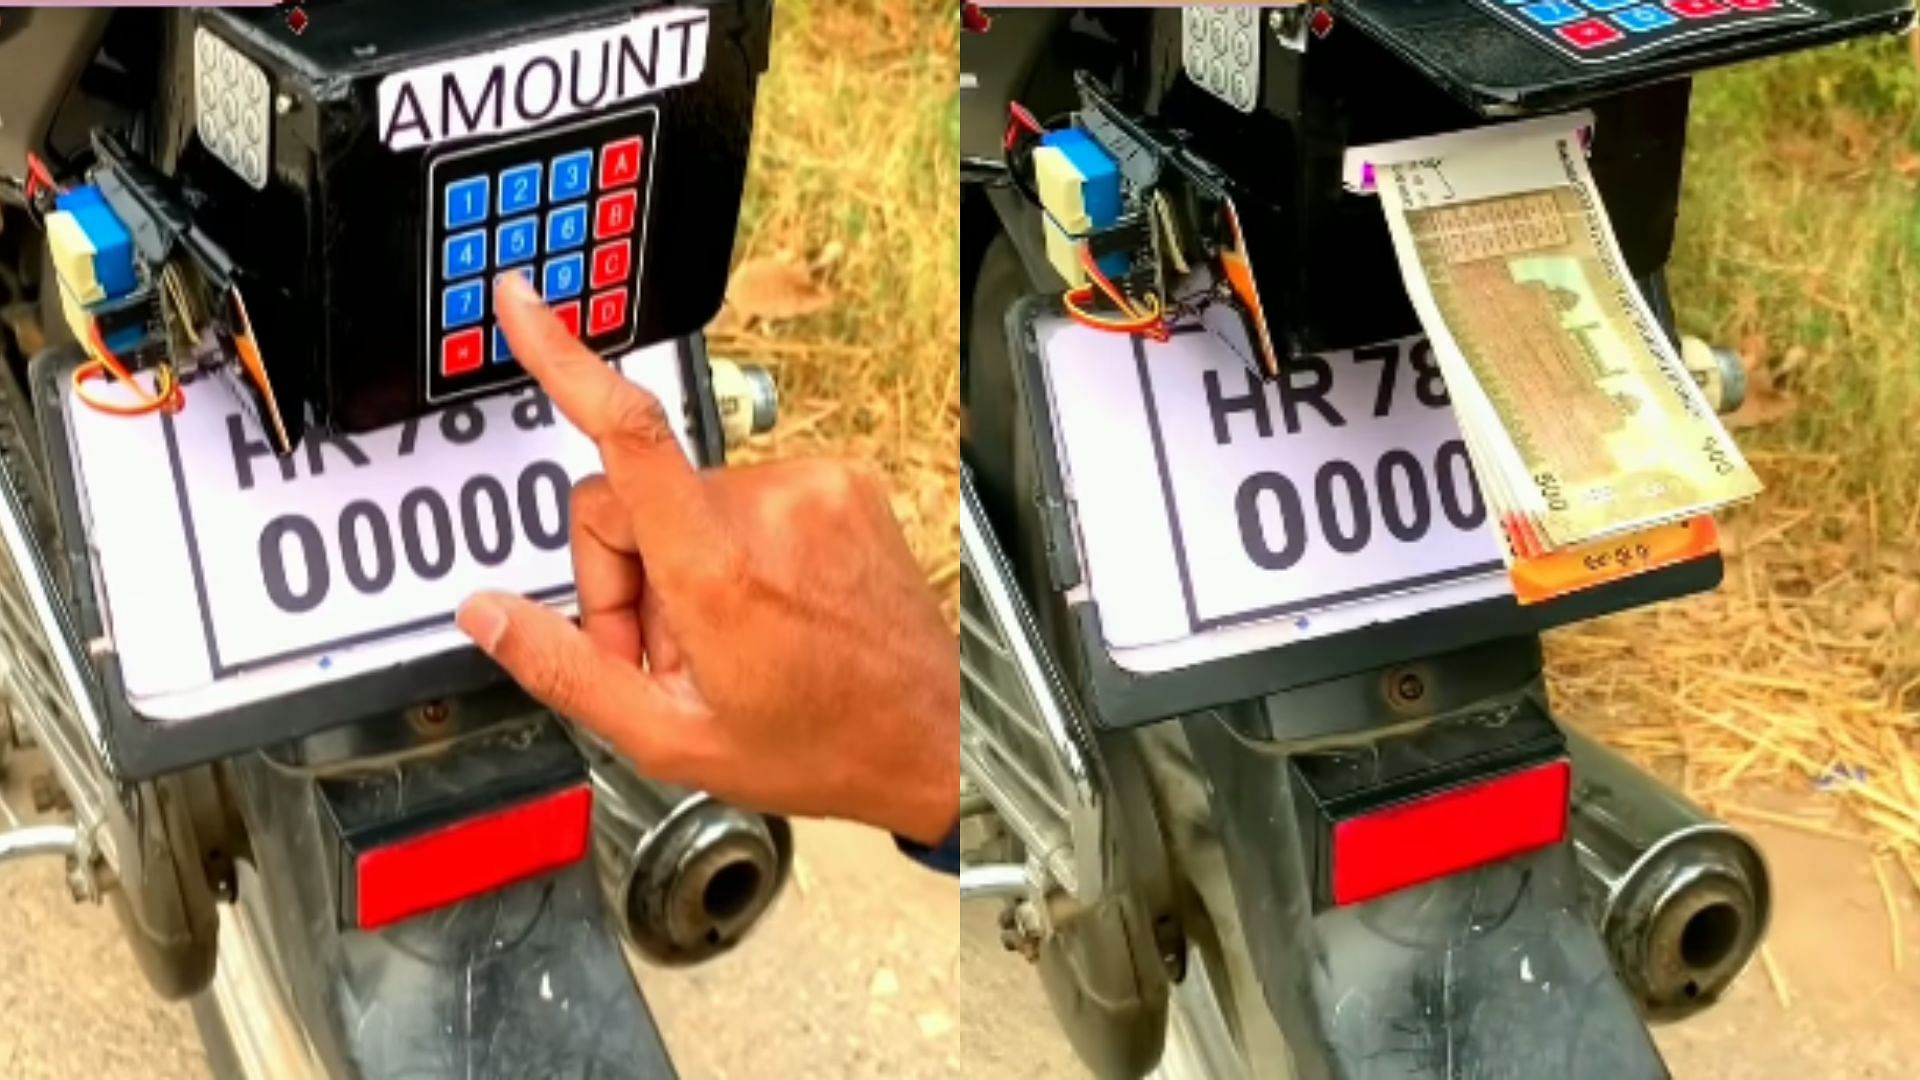 Man installed ATM machine behind bike withdrew money by inserting card funny video